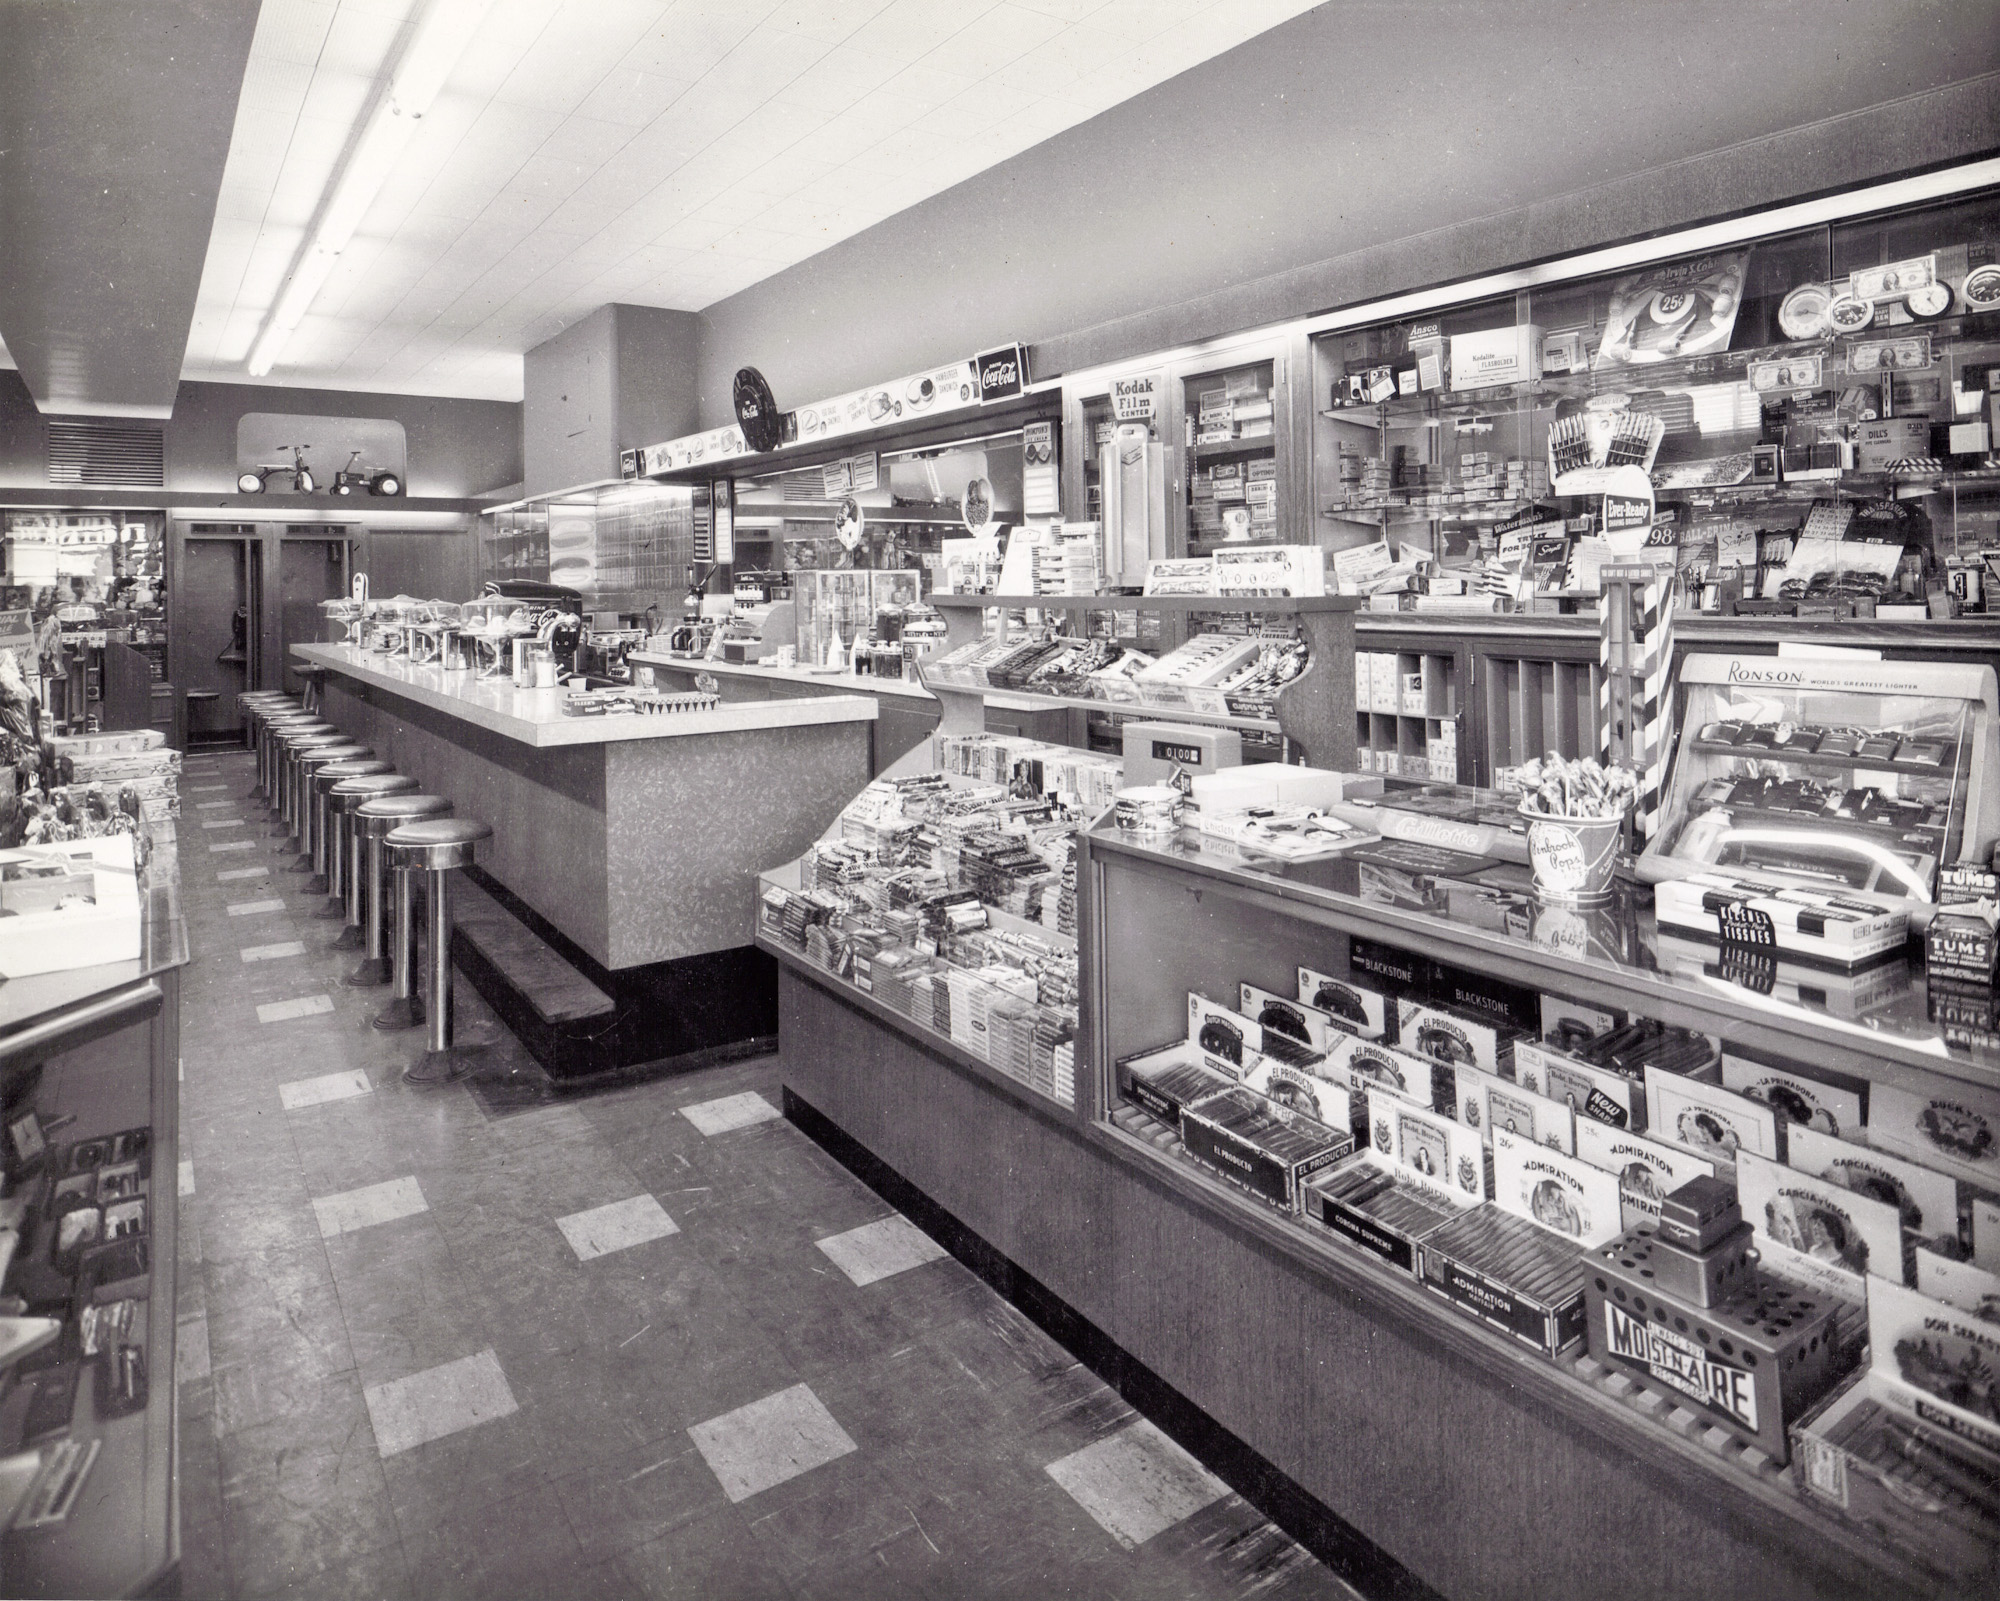 Early 1950s lunch counter somewhere in northern New Jersey that sold candy, cigars, small gifts and toys. View full size.